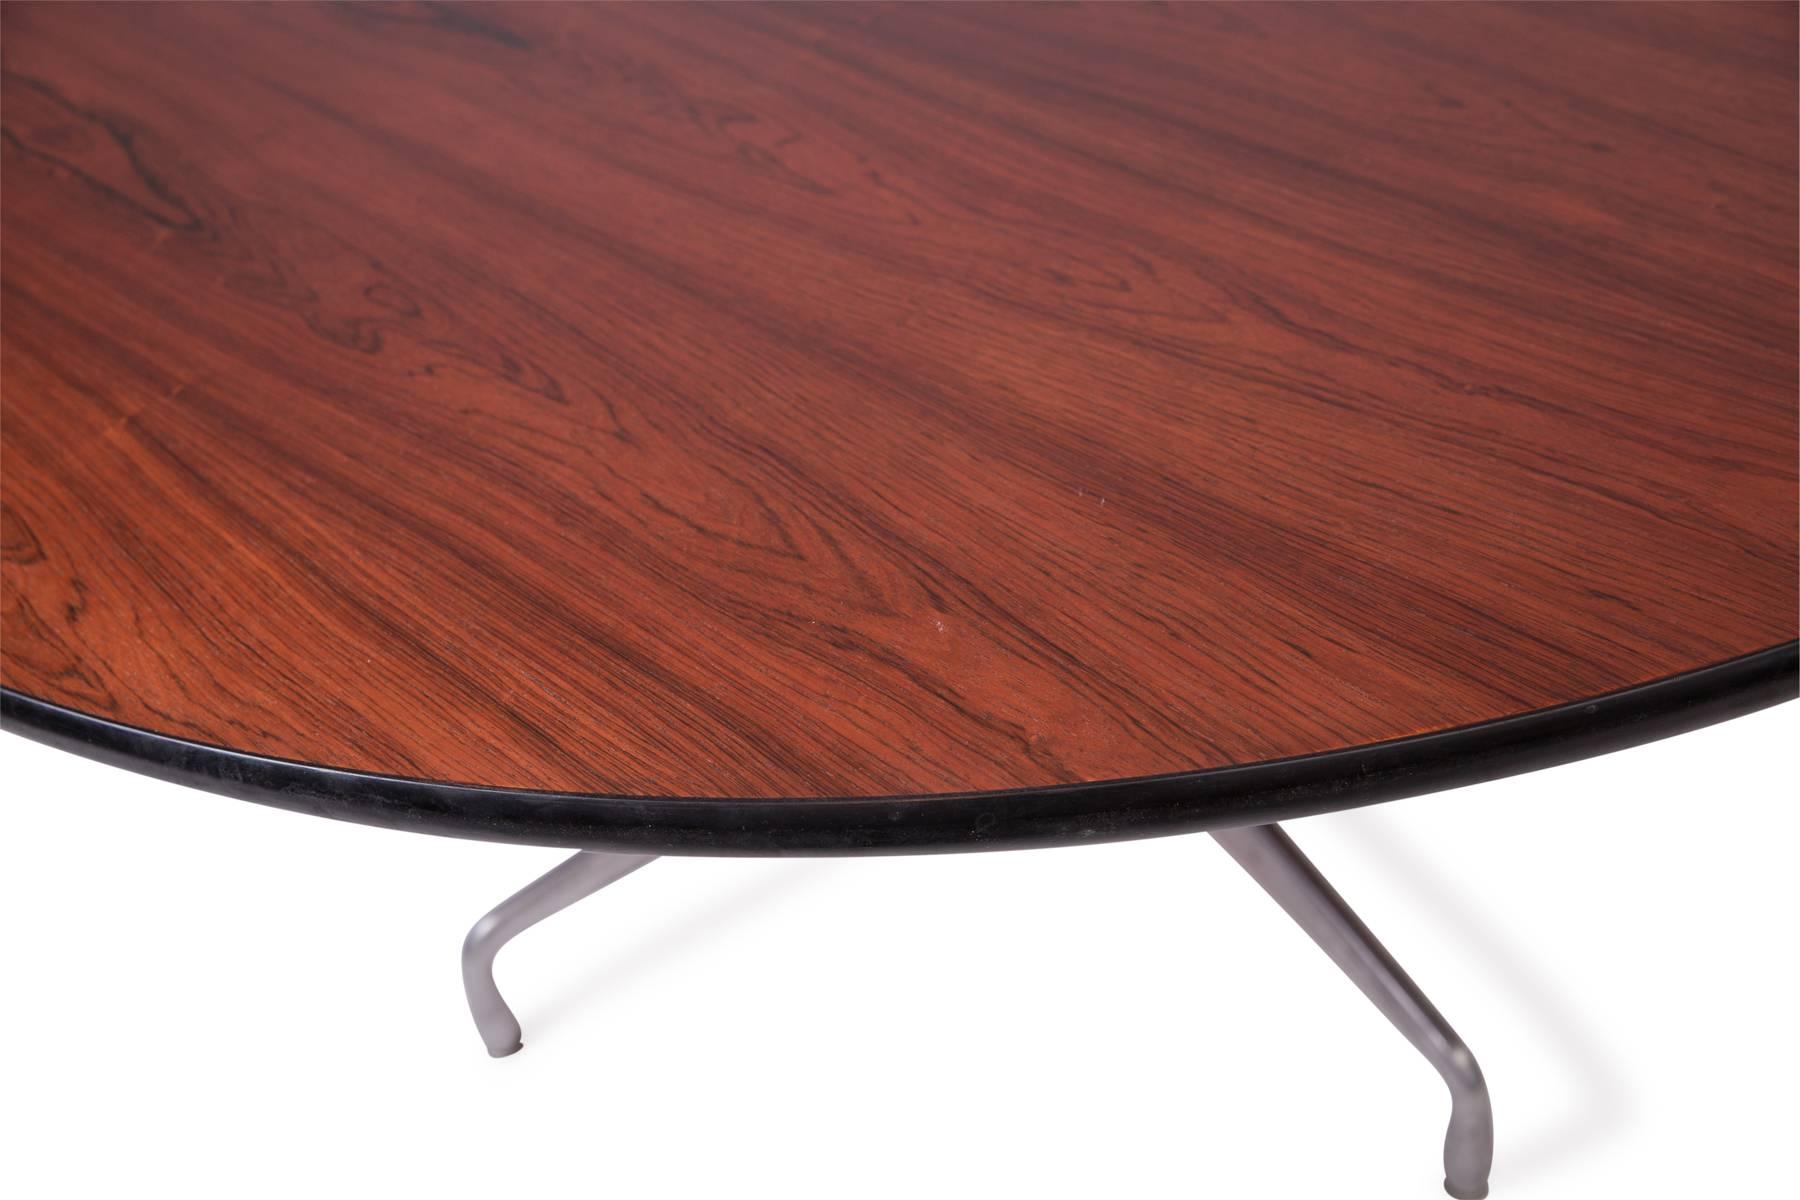 Charles and Ray Eames for Herman Miller rosewood dining table, circa mid-1960s. Beautifully grained Brazilian rosewood over the iconic Herman Miller base. Rare 60